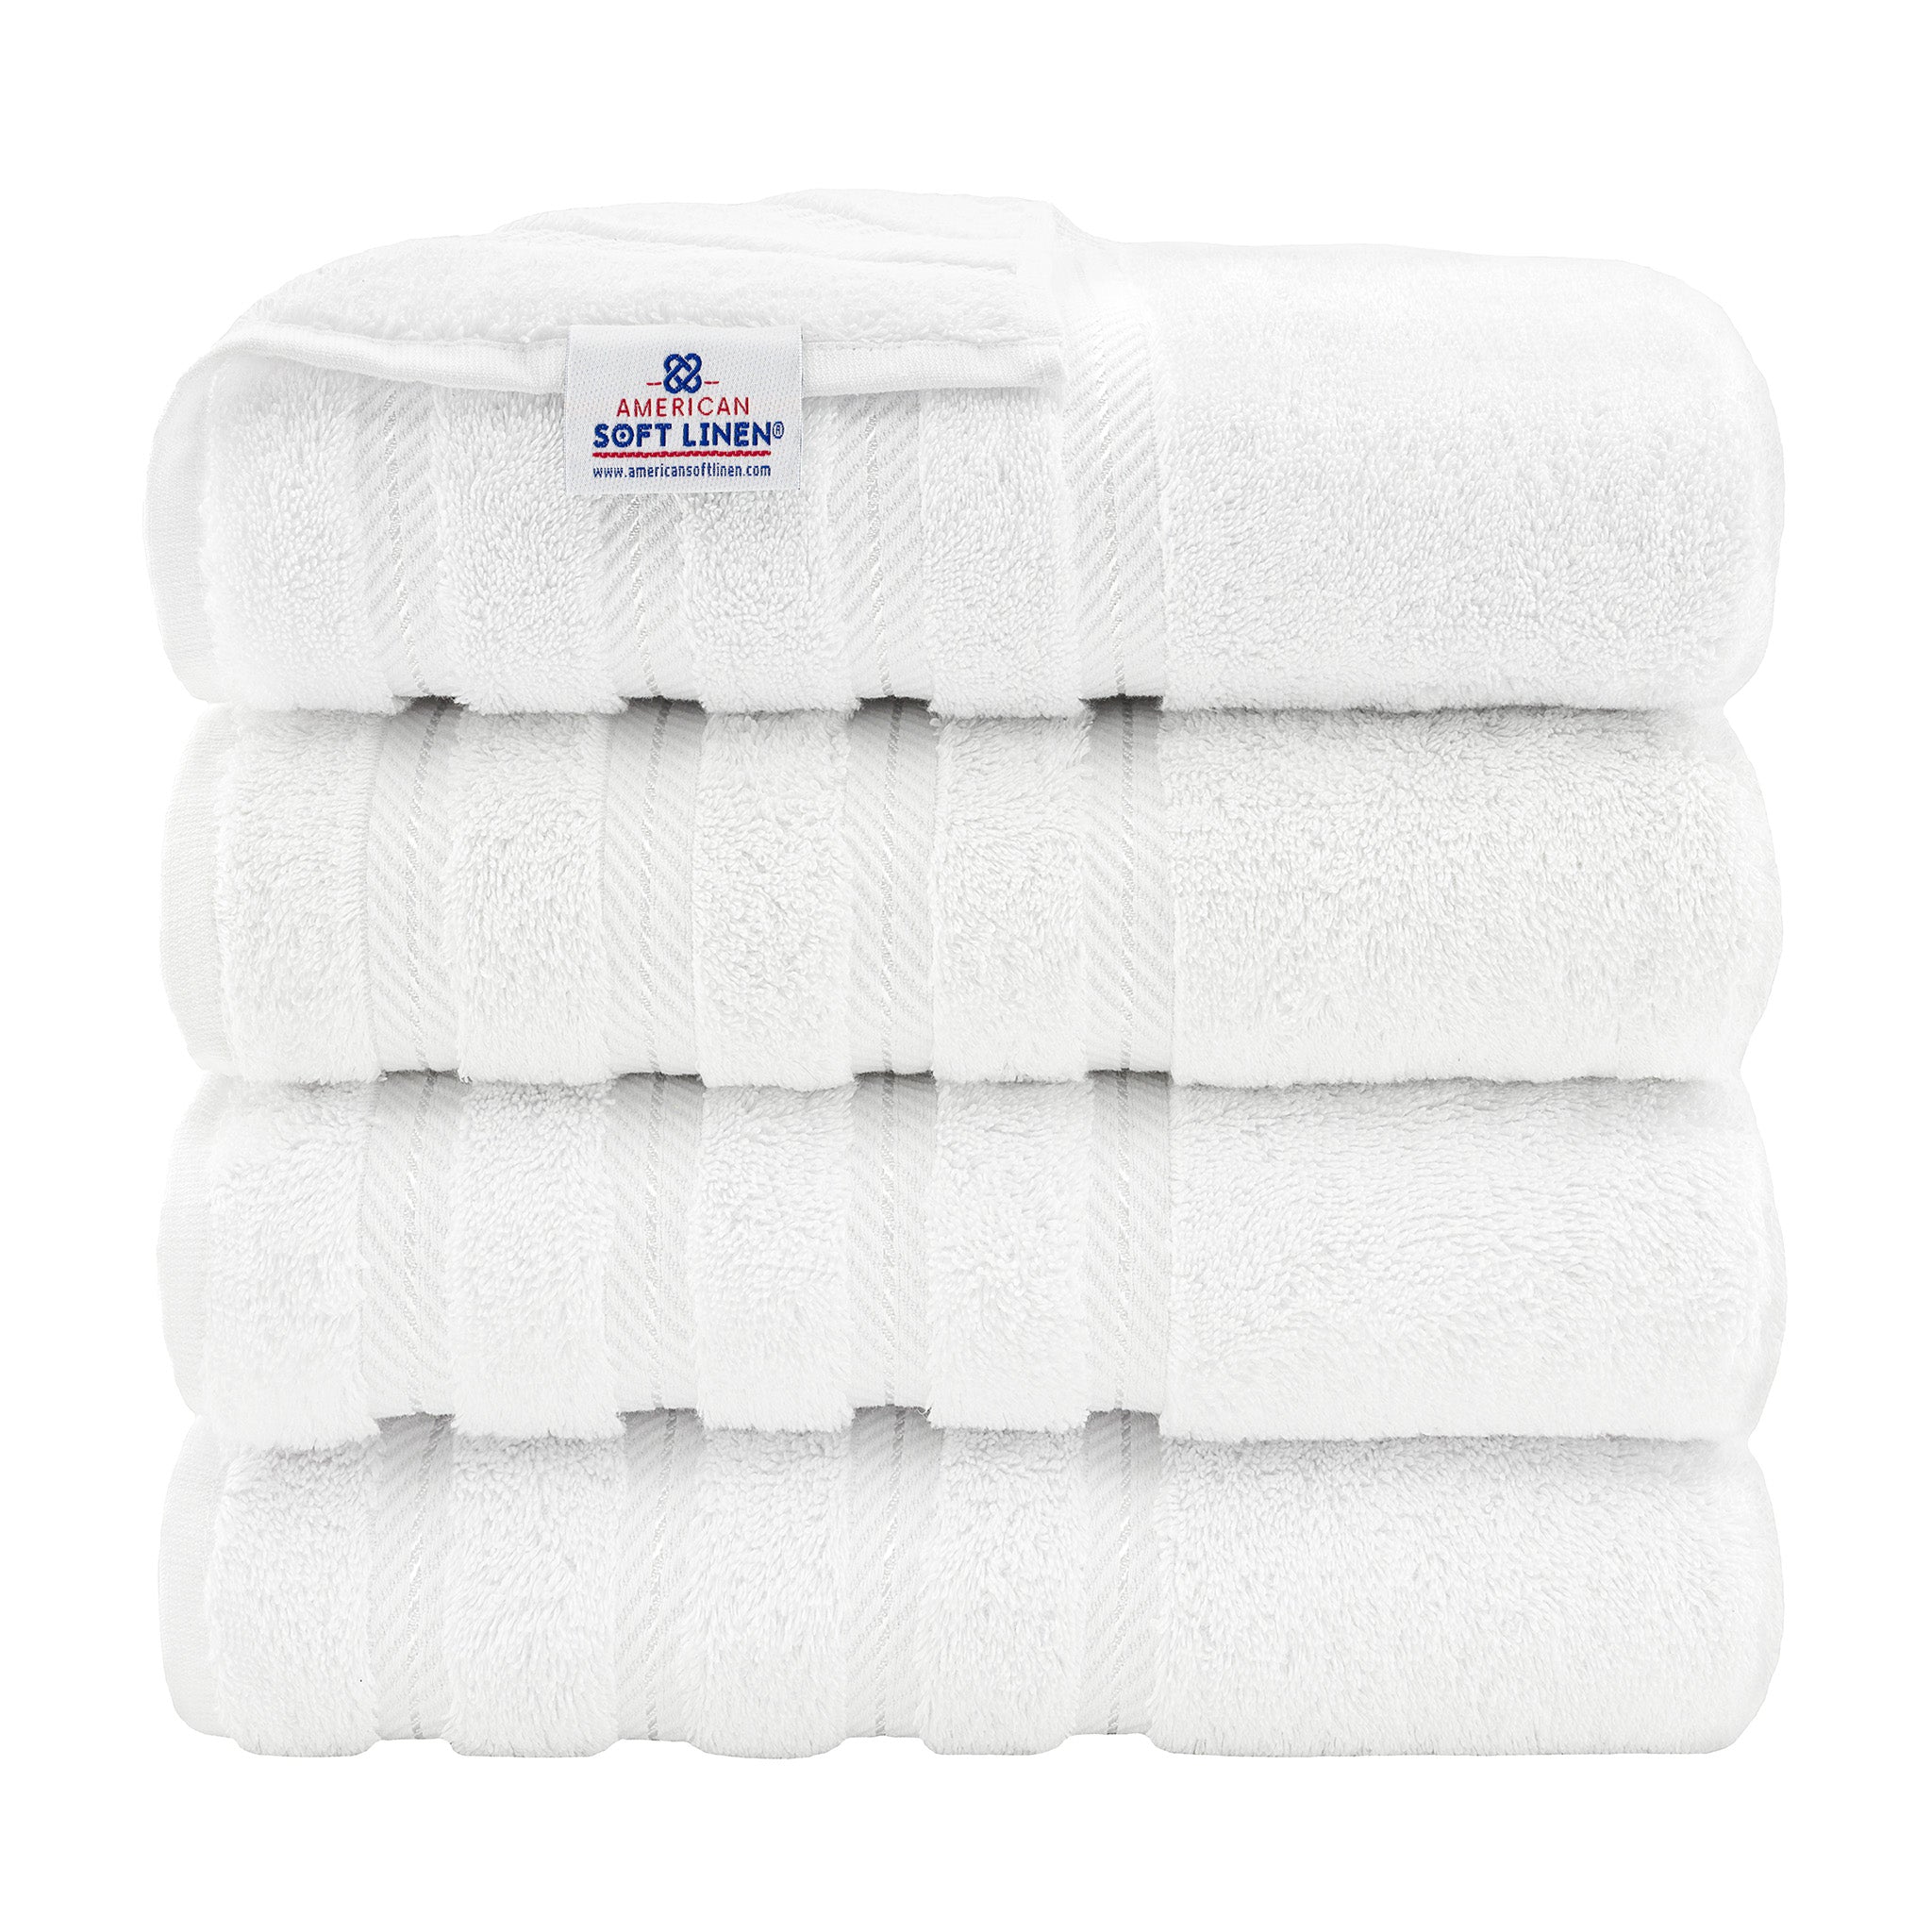 Bliss Egyptian Cotton Luxury Towels, Size: Tub Mat, Blue